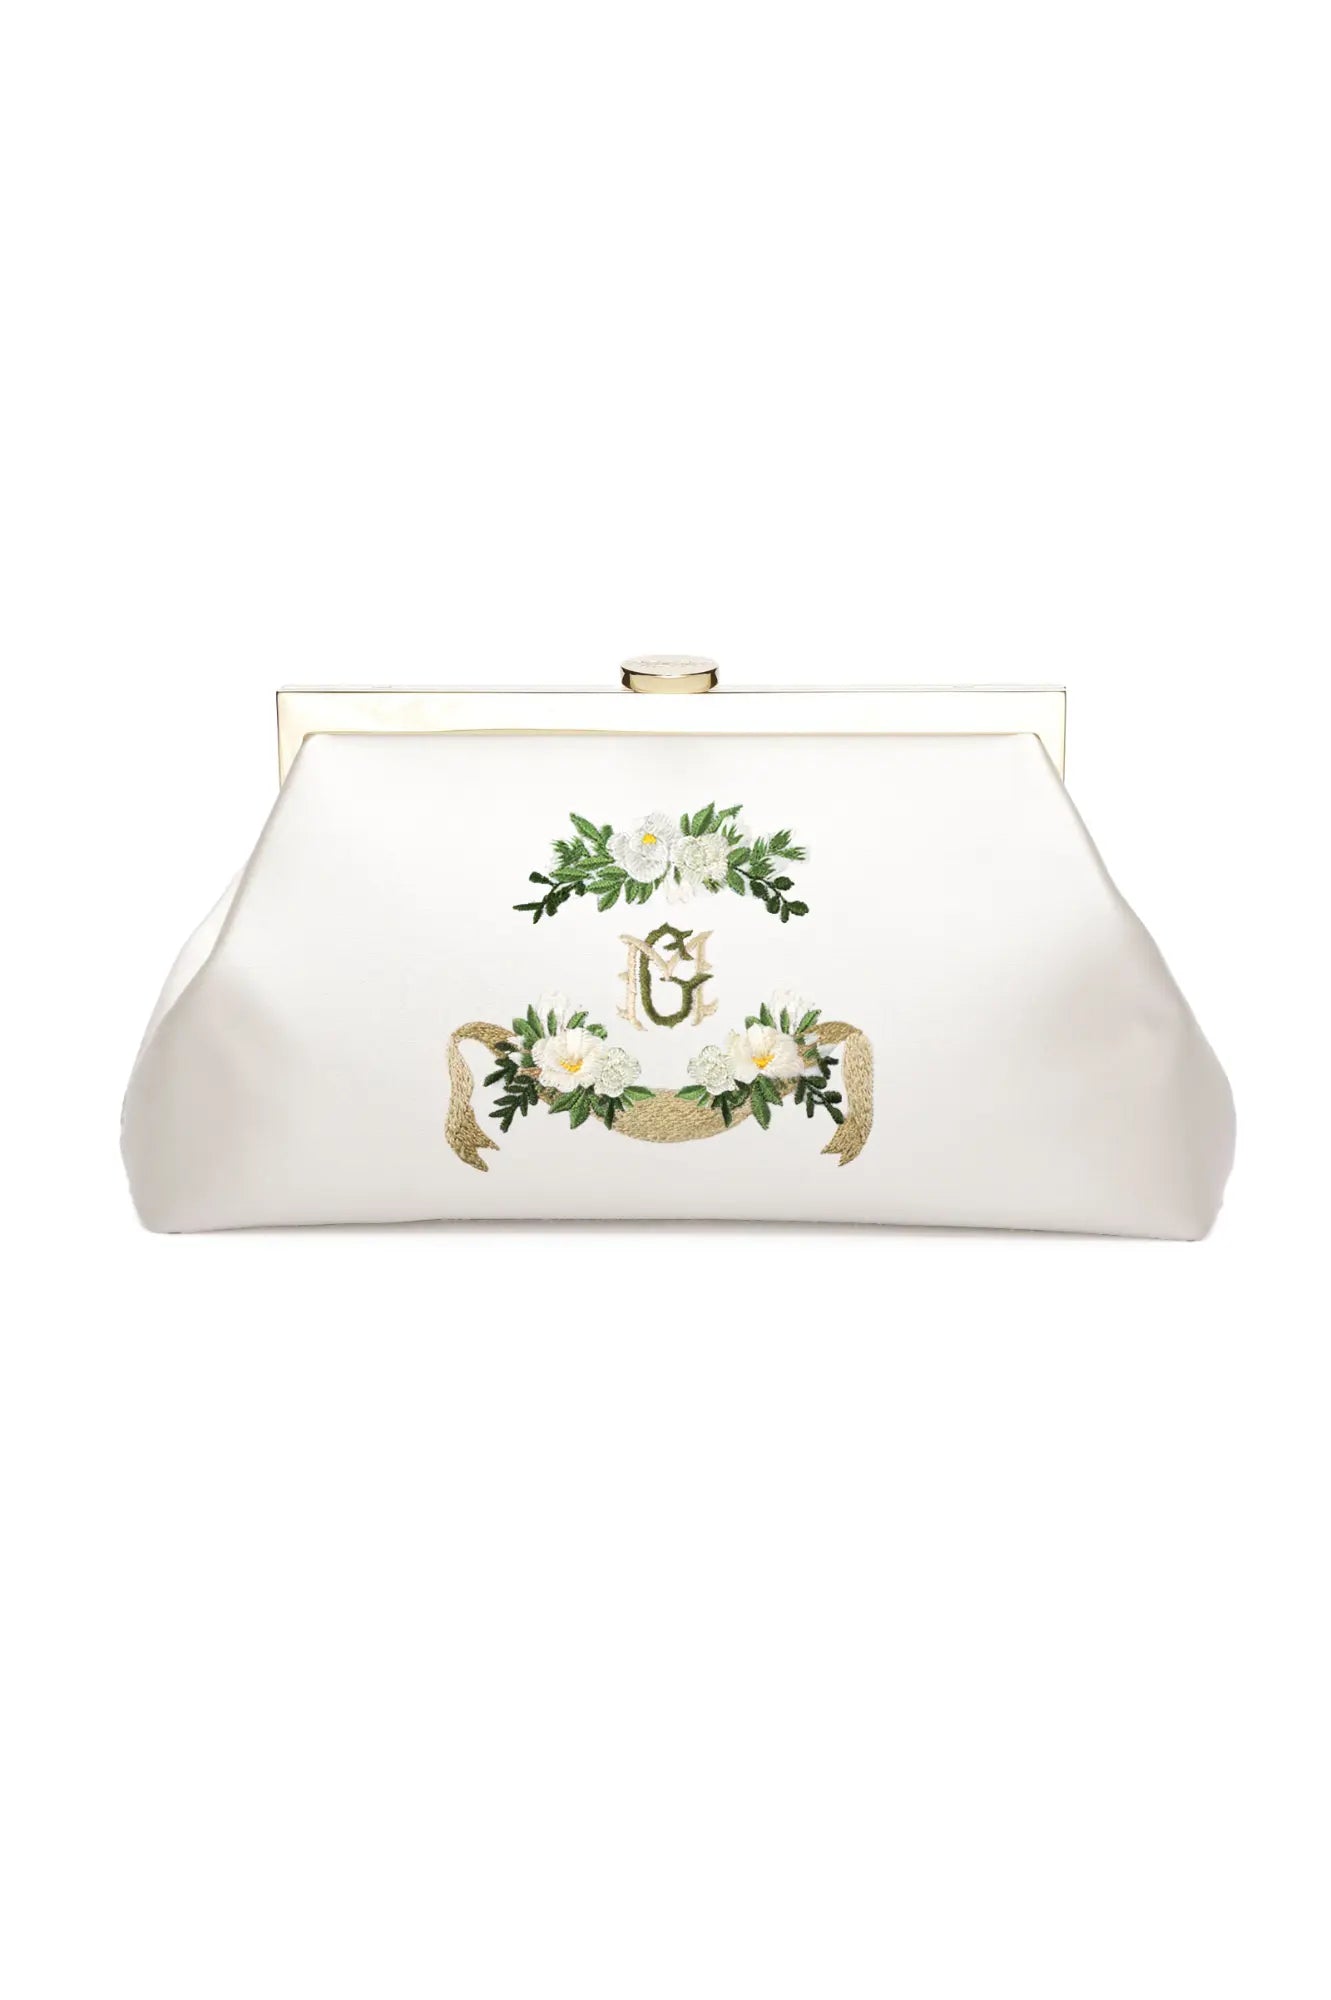 The Bella Rosa Collection Rosa Clutch Monogram Embroidery with green and gold floral embroidery, a personalized wedding accessory.